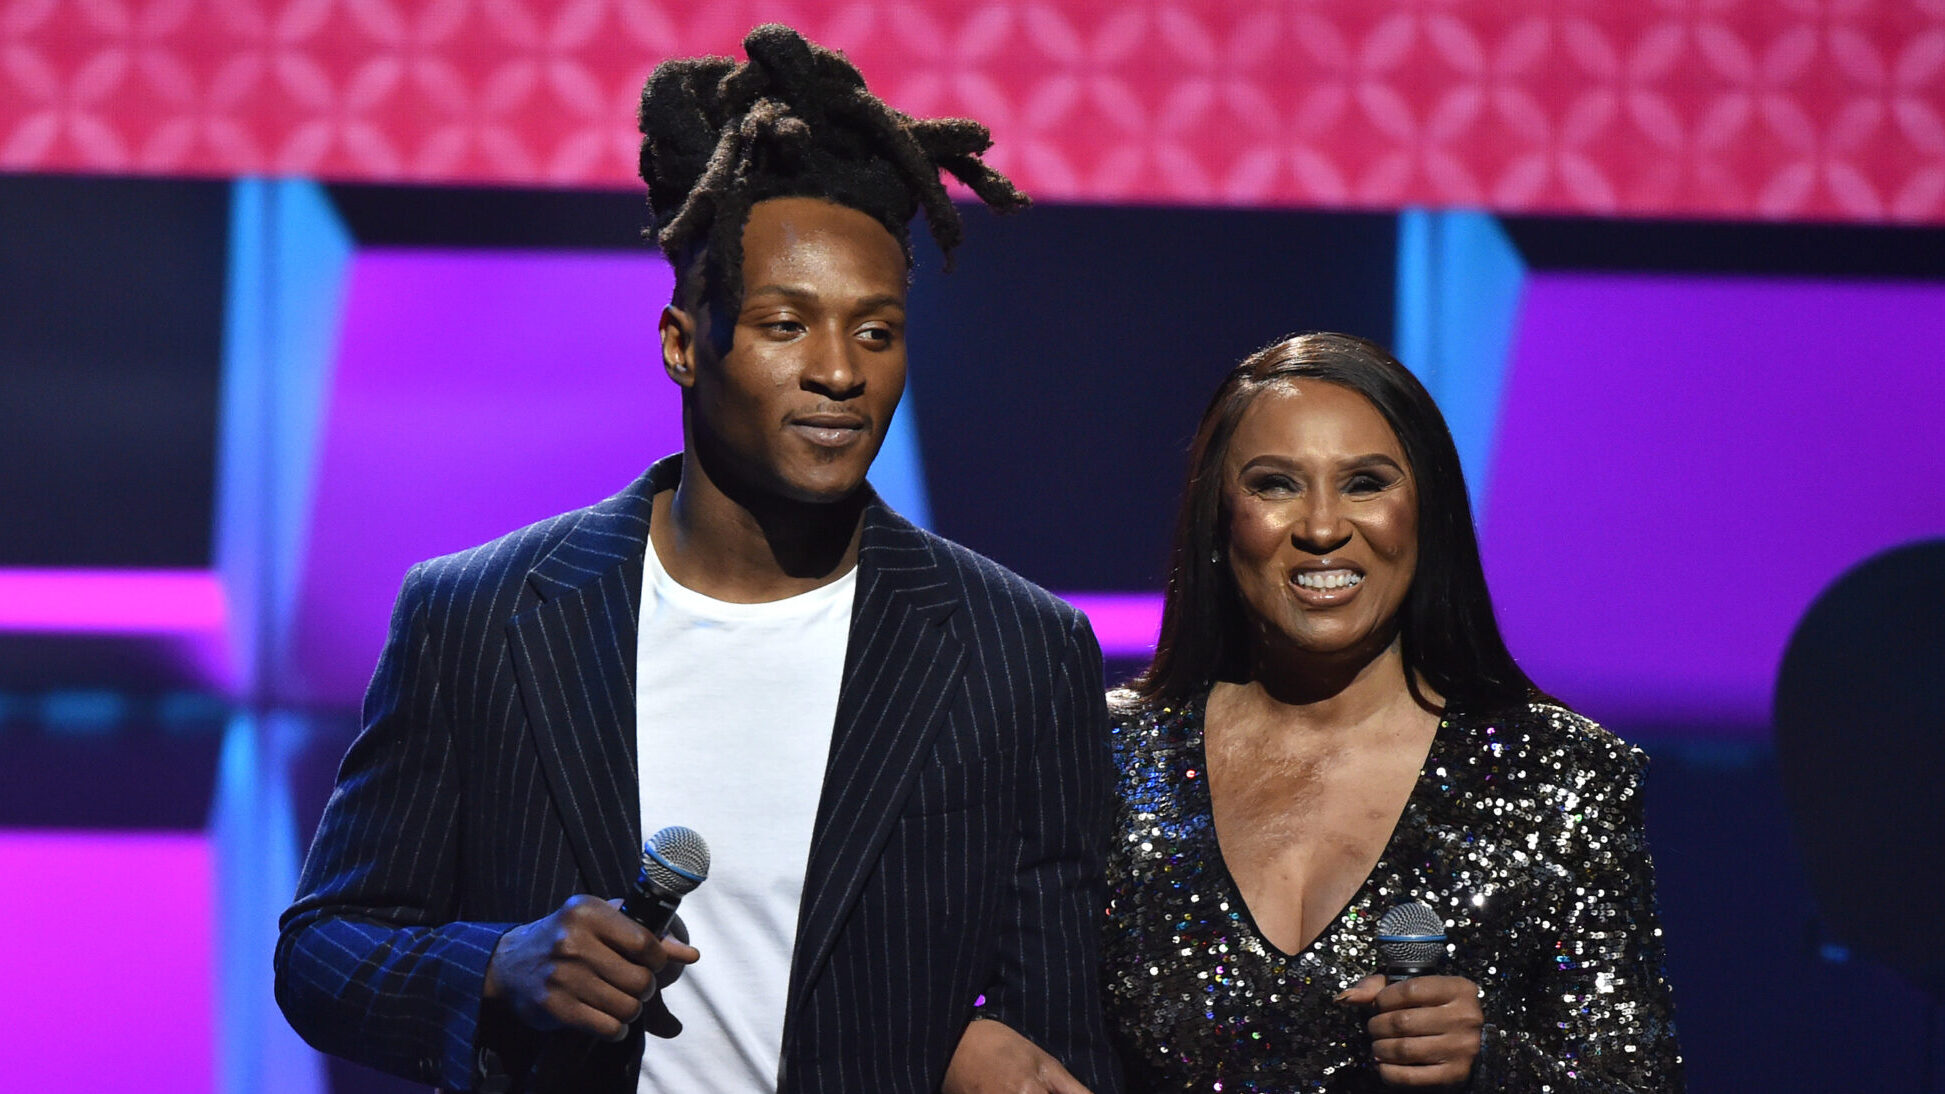 DeAndre Hopkins (L) and Sabrina Greenlee (Photo by Aaron J. Thornton/Getty Images for BET)...